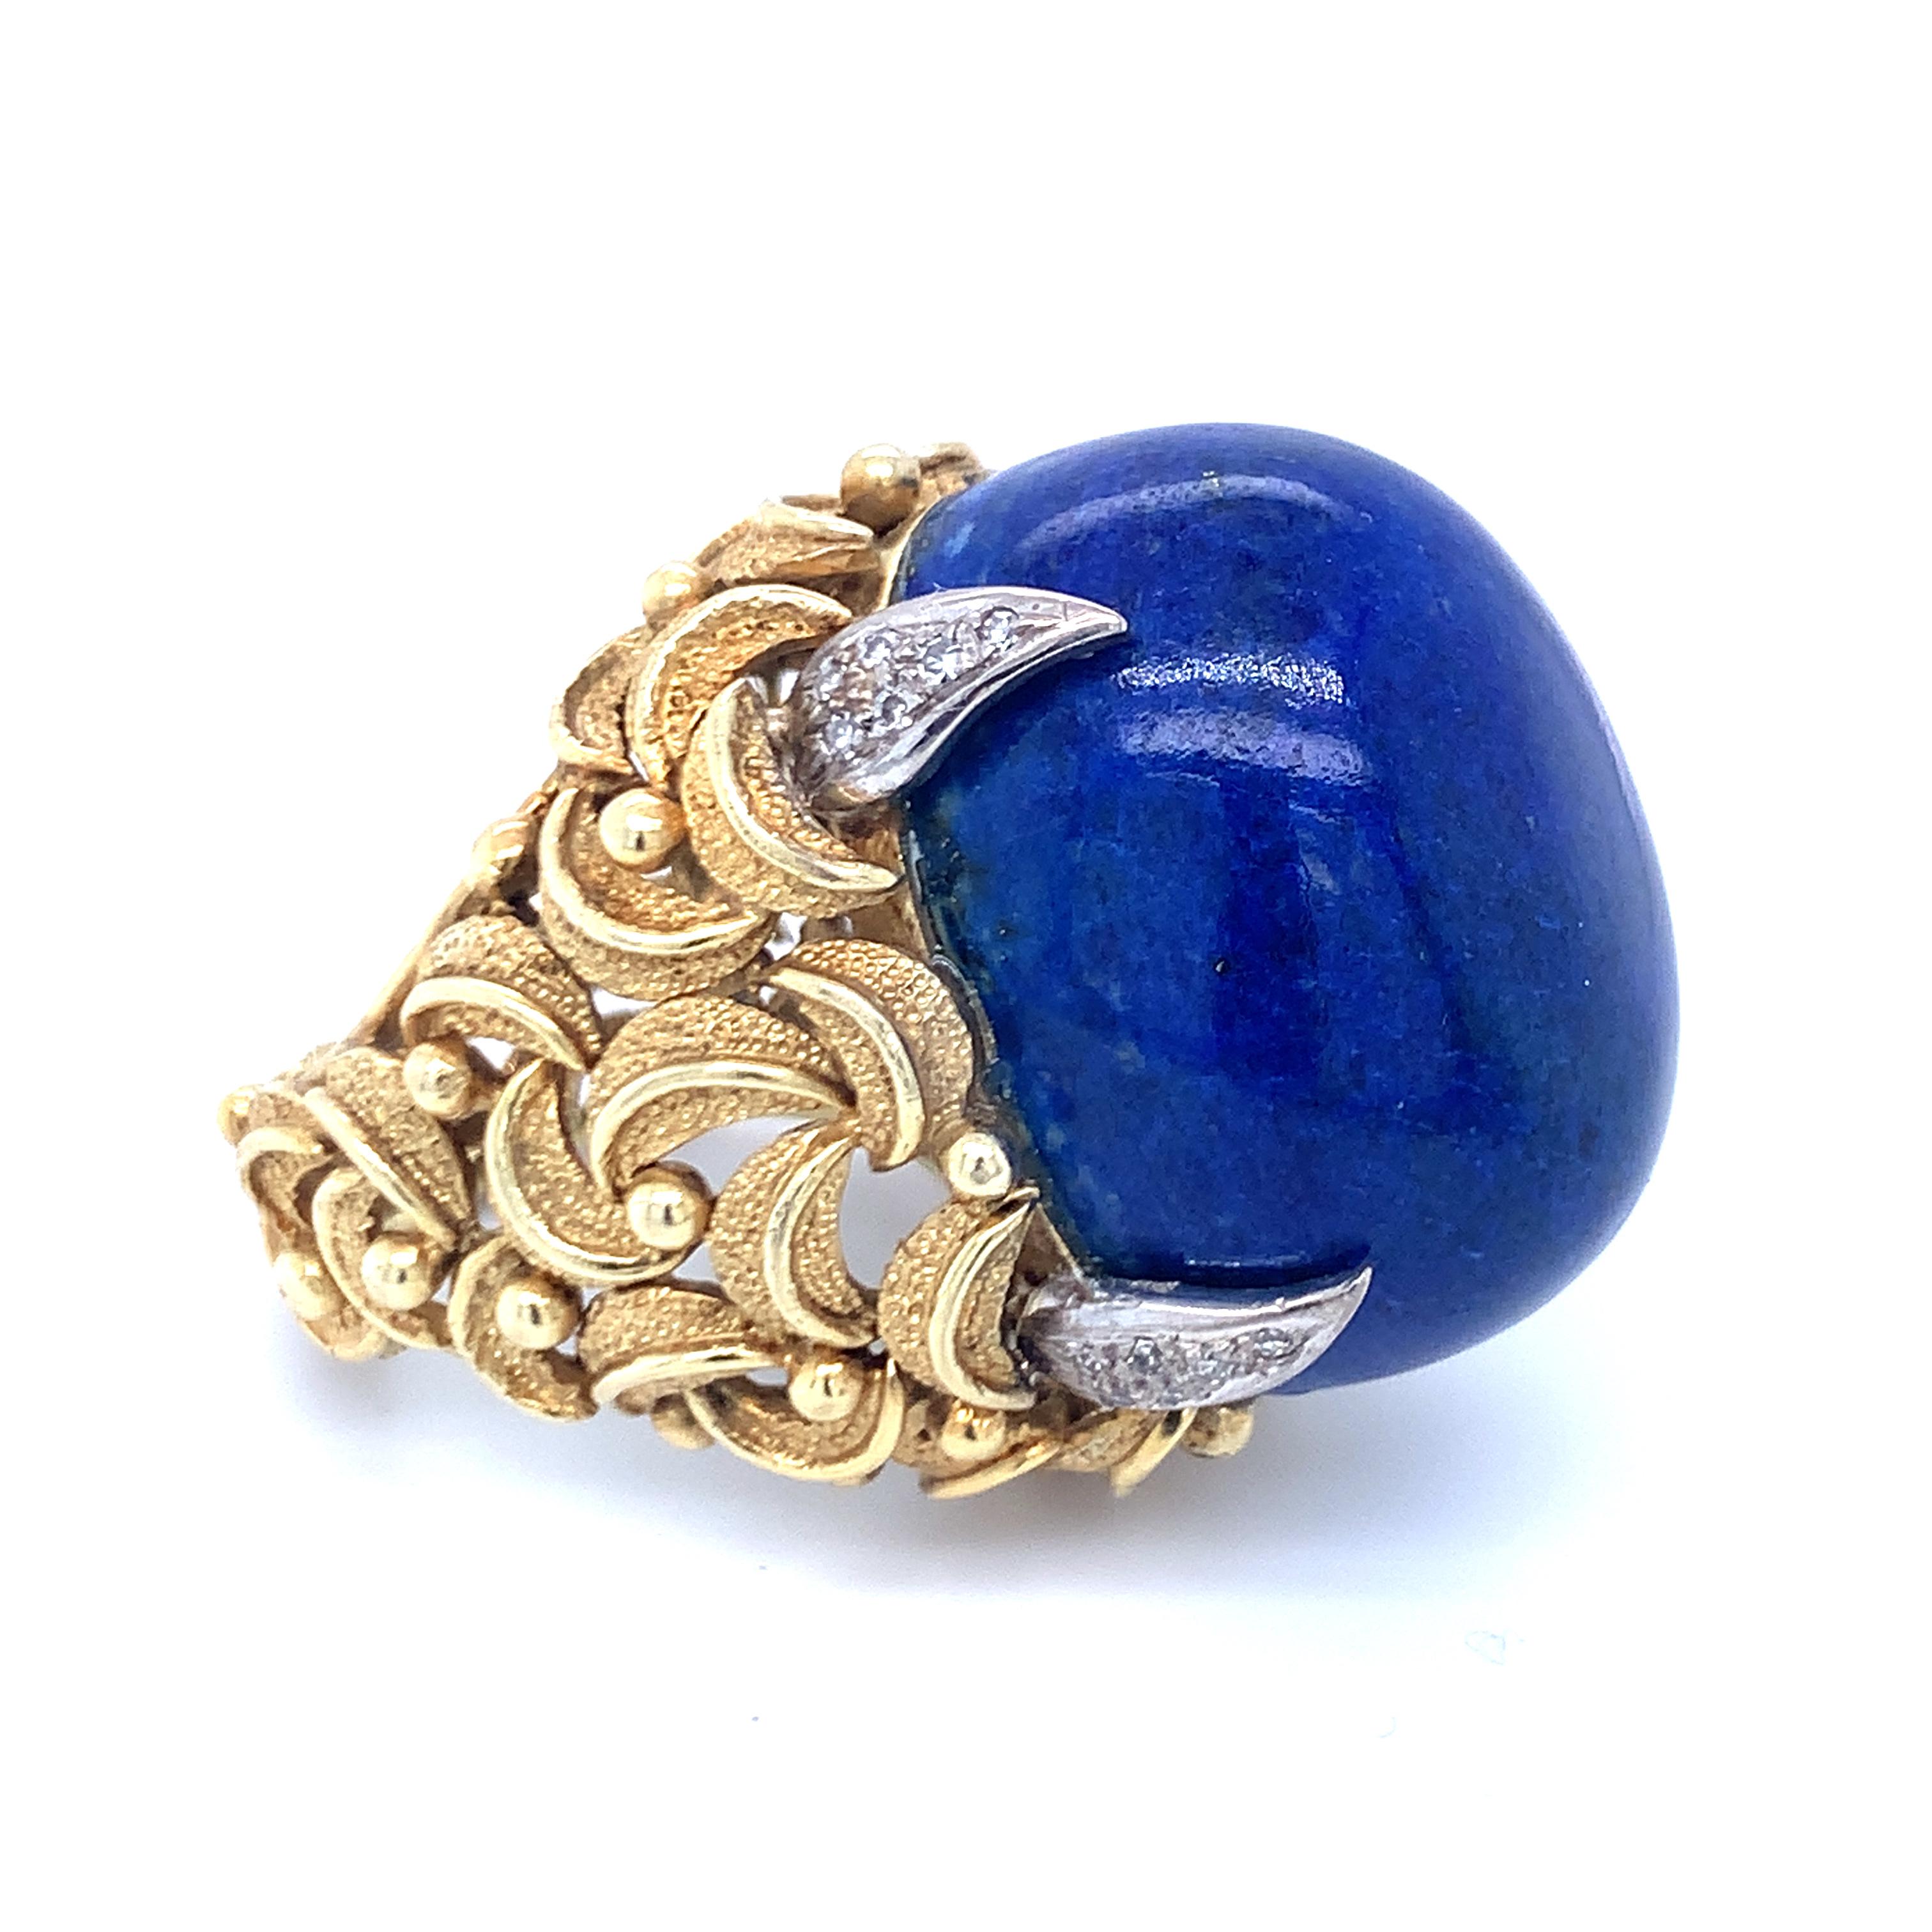 One lapiz lazuli and diamond 18K yellow gold ring with heavily textured gold finish centering one massive oval cabochon lapis stone measuring 28 x 20 x 15 mm. in size. The ring is further accented by 24 single round cut diamonds weighing 0.30 ct. in